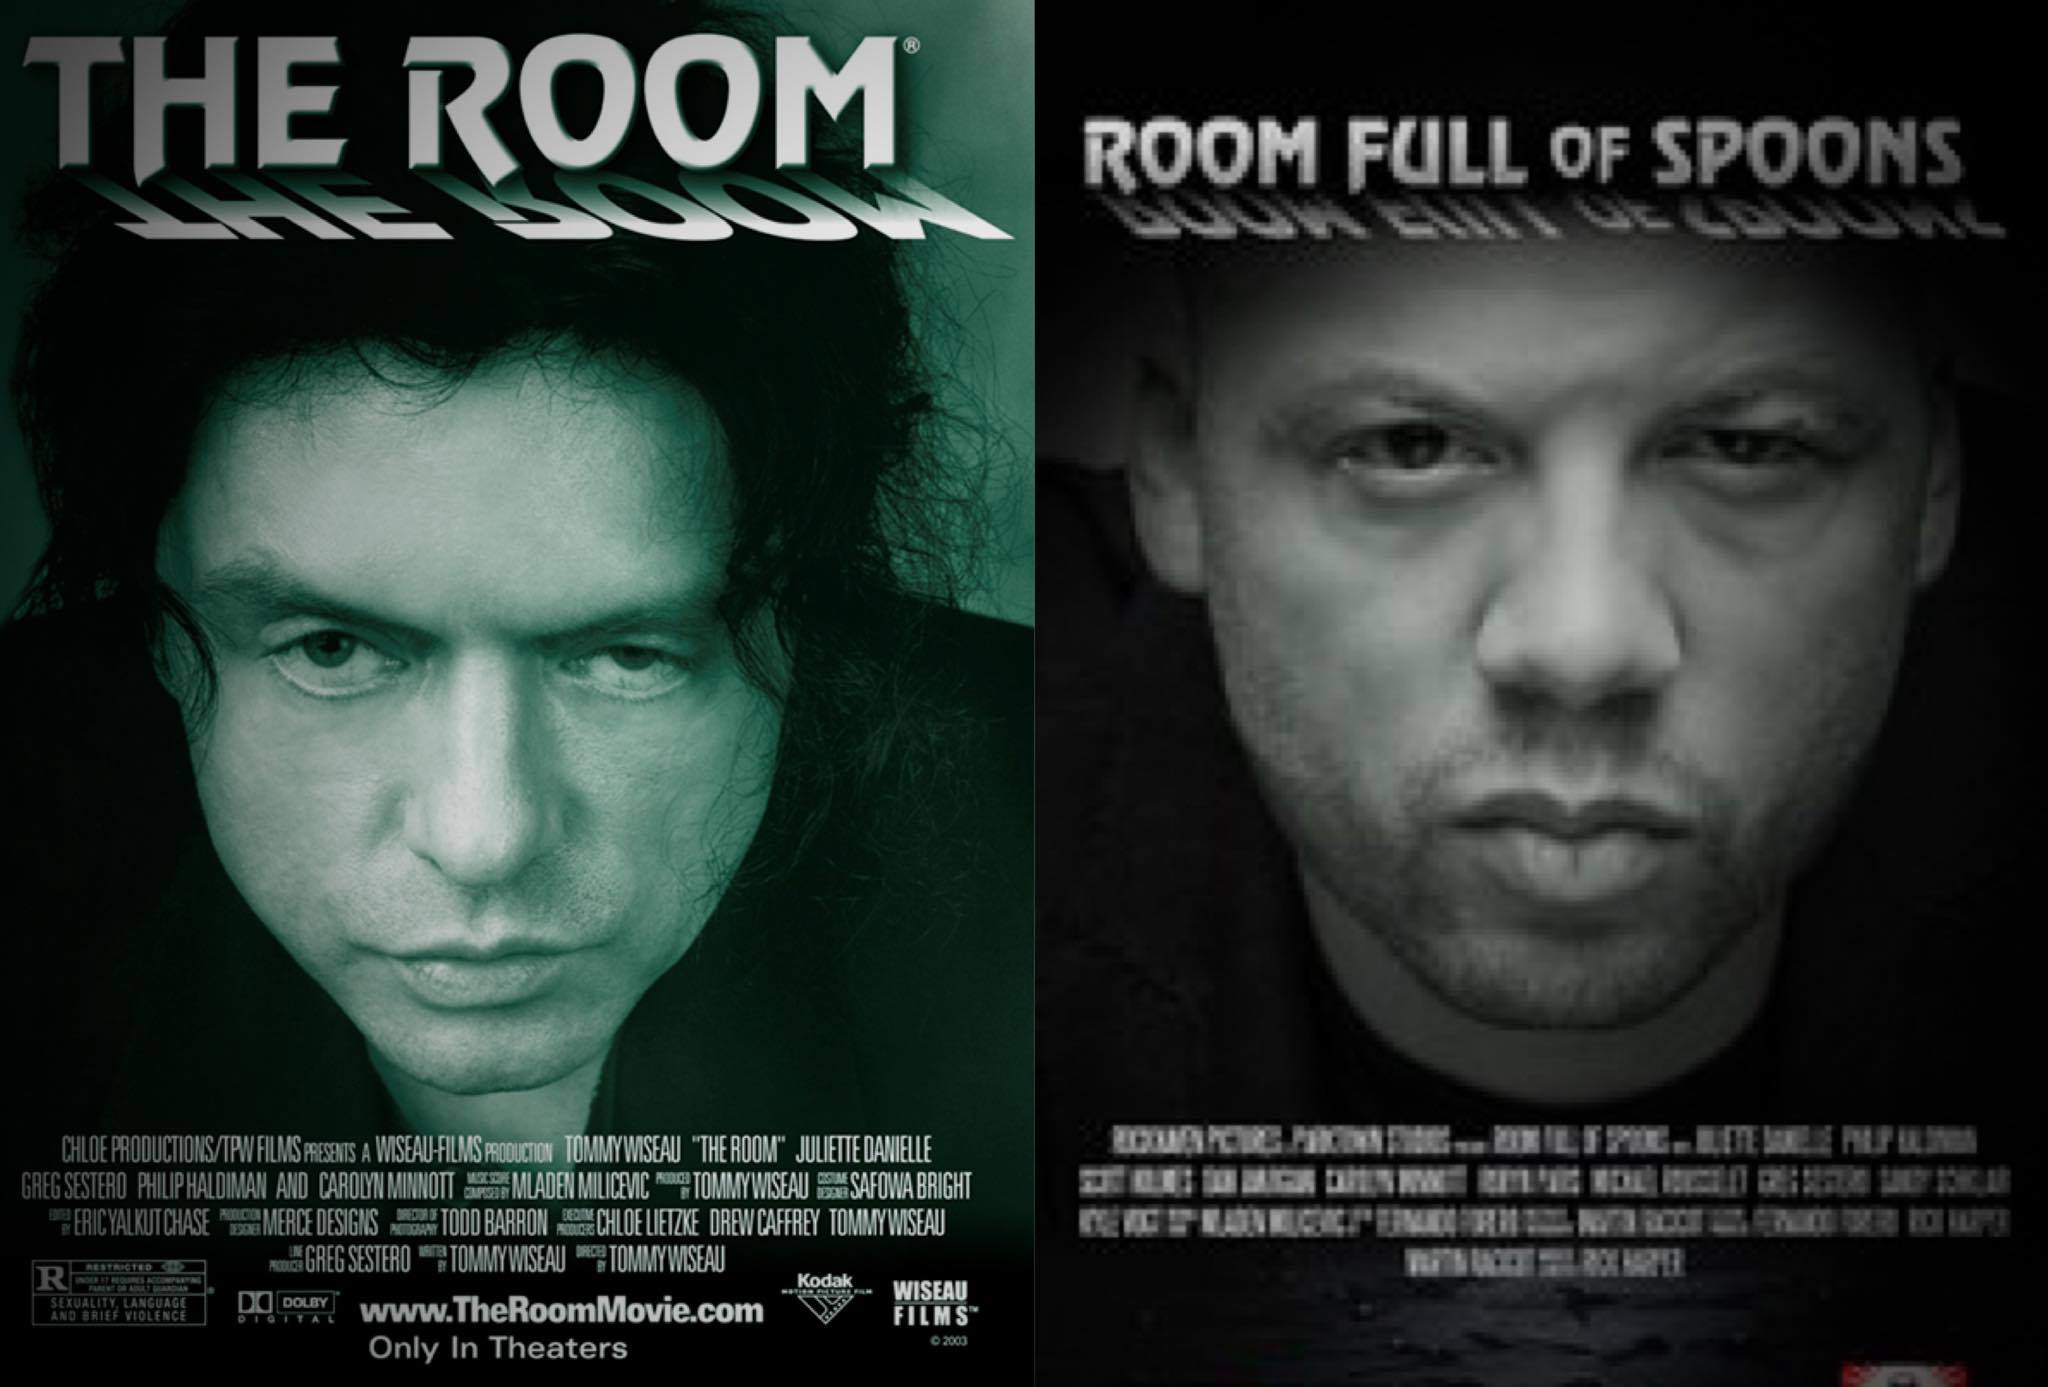 Exclusive: Details From Tommy Wiseau's 'The Room' Lawsuit Revealed